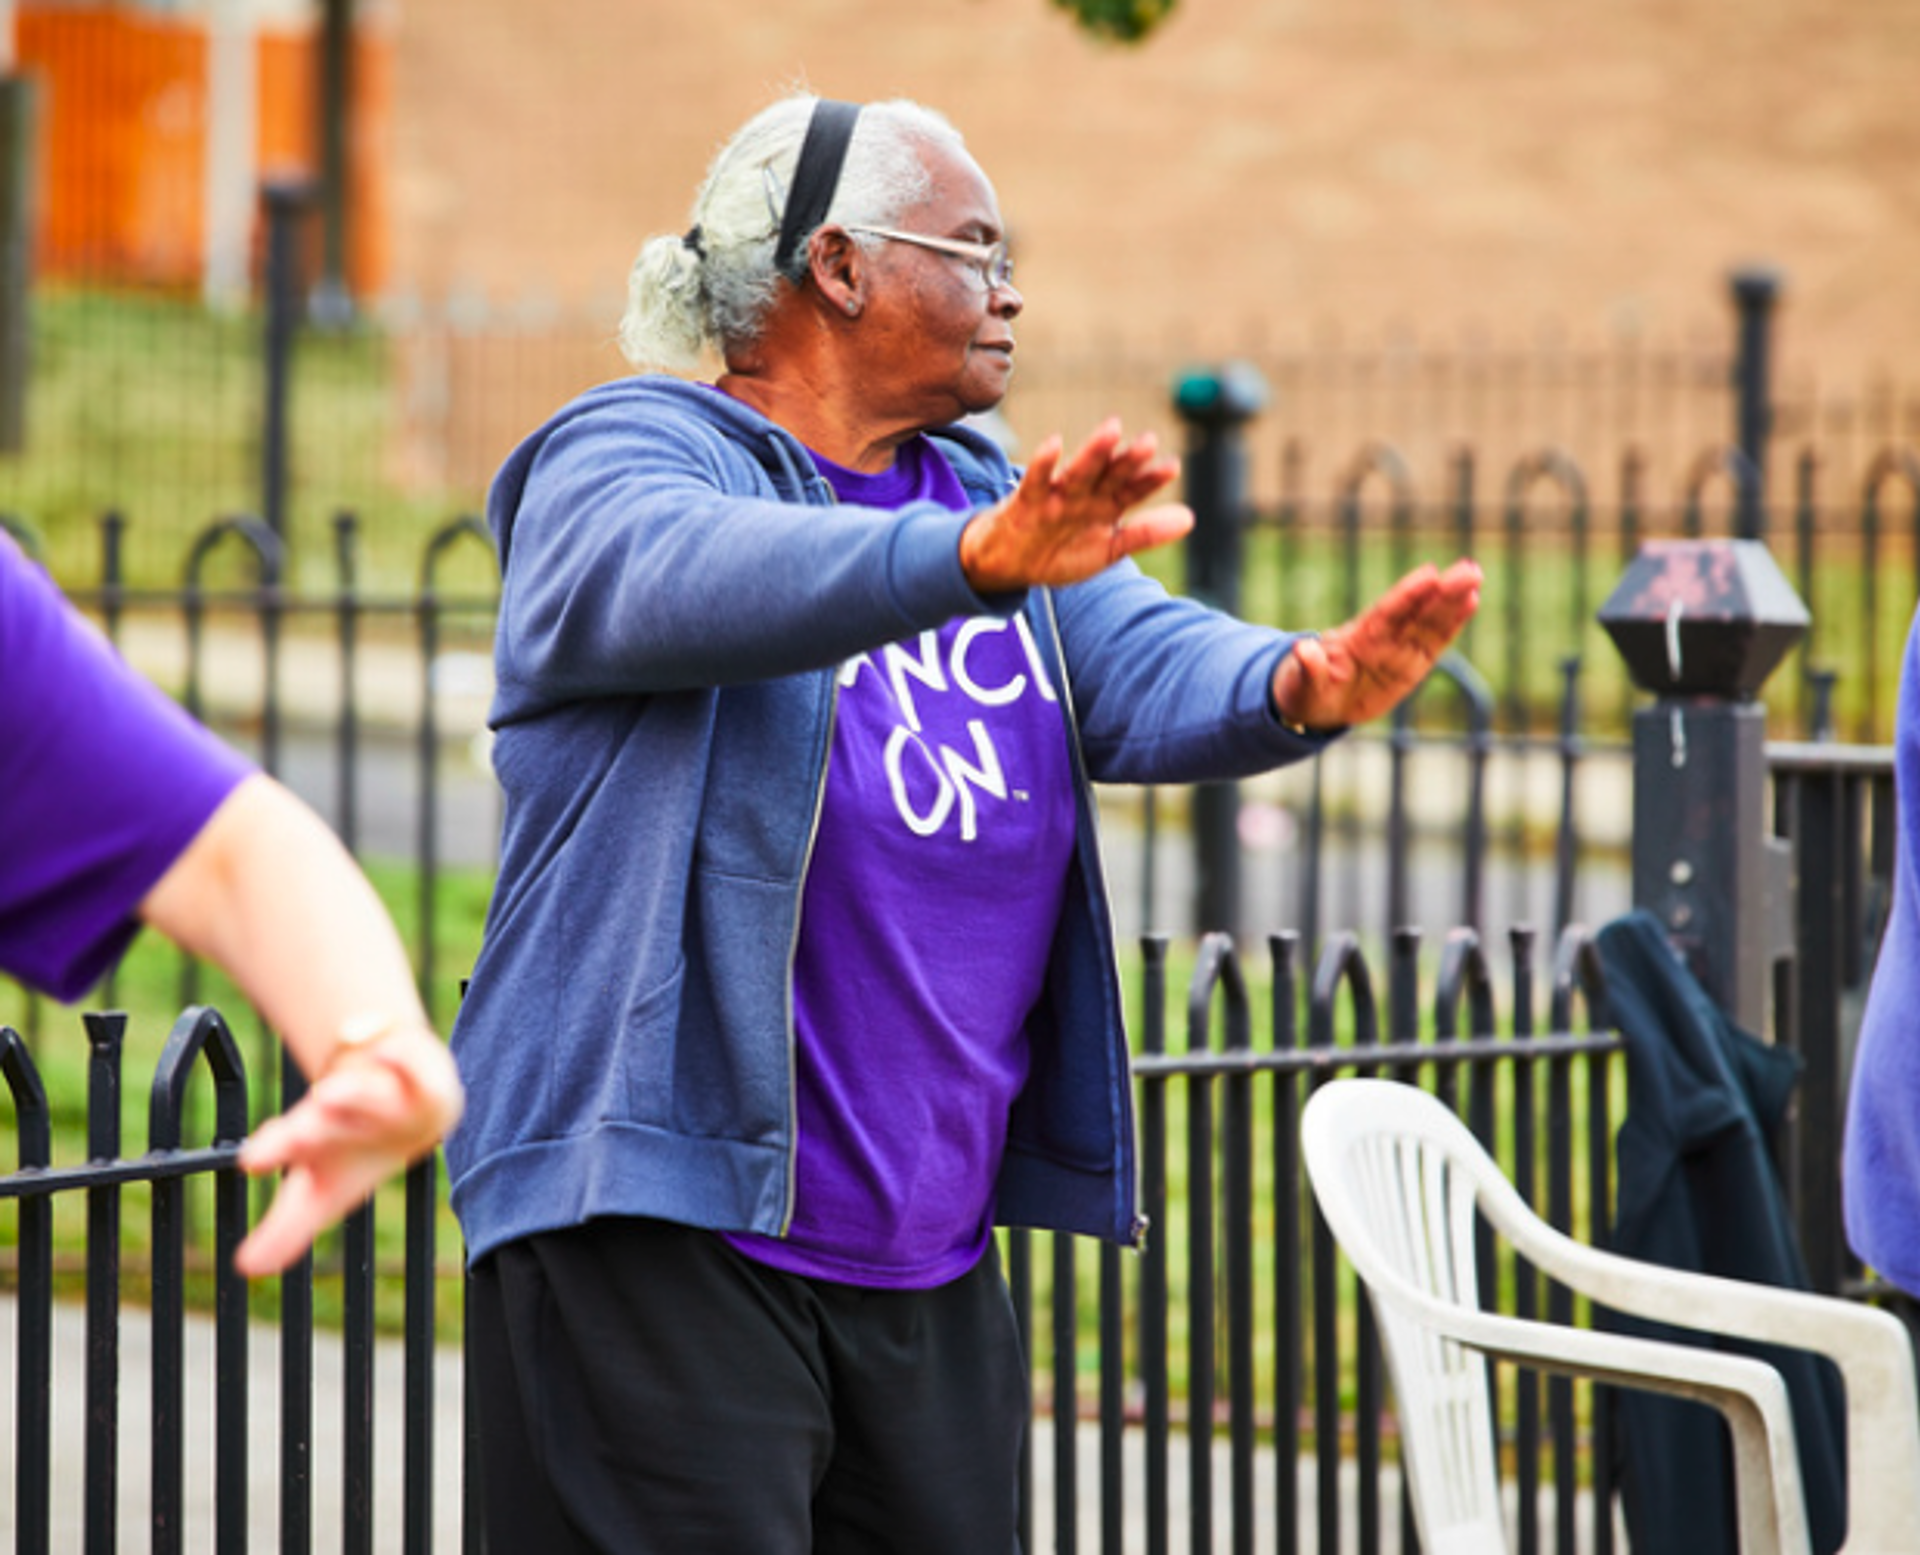 One older global majority female dancer with arms out in front of her, wearing purple top outdoors in front of black gate.